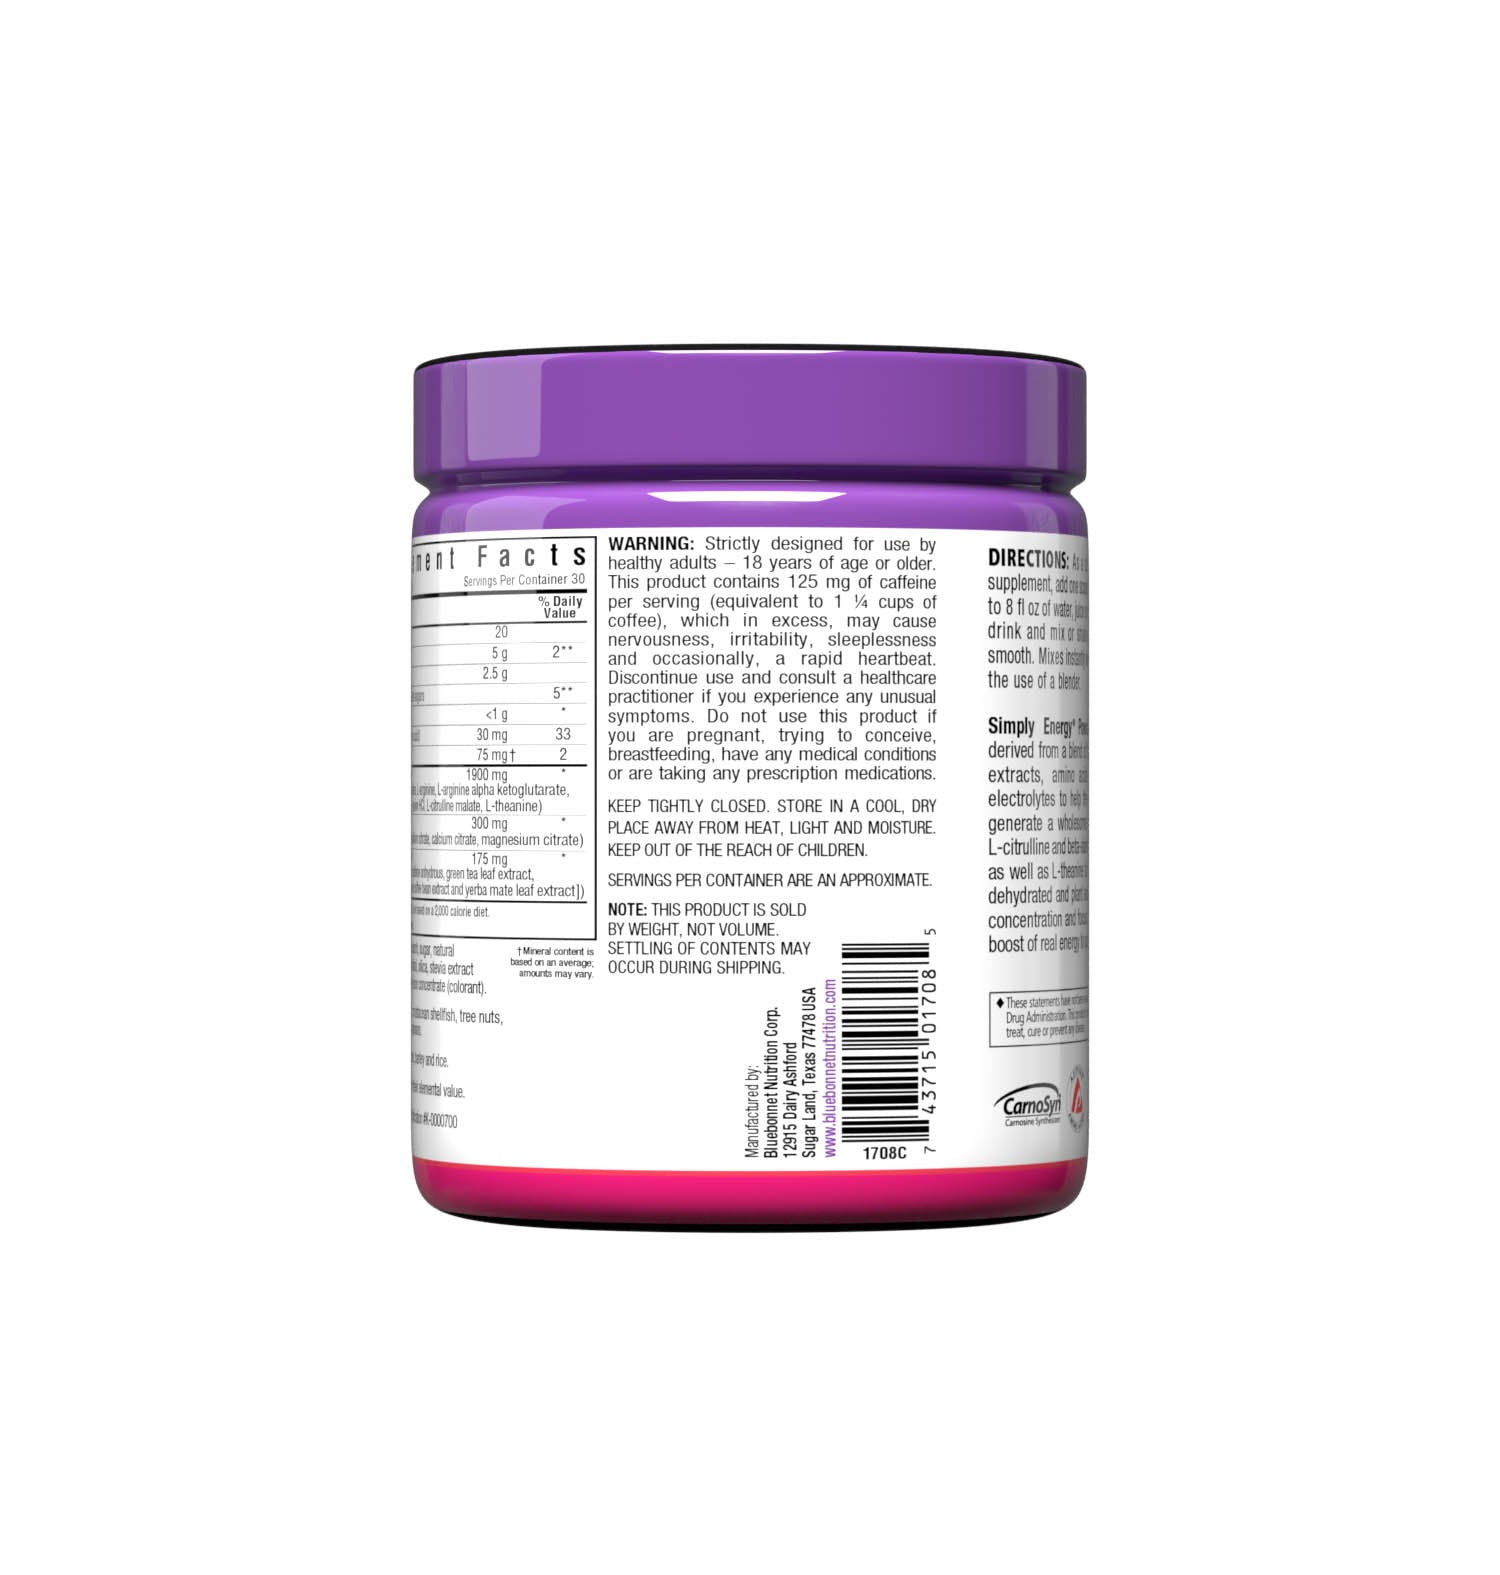 Simply Energy Powder is derived from a blend of herbal extracts, amino acids and electrolytes to help the body generate a wholesome surge of energy. The amino acids, L-arginine, L-citrulline and beta-alanine, have been incorporated to enhance blood flow, as well as theanine to help the mind reach optimal mental clarity. Supplement facts panel. #size_10.58 oz